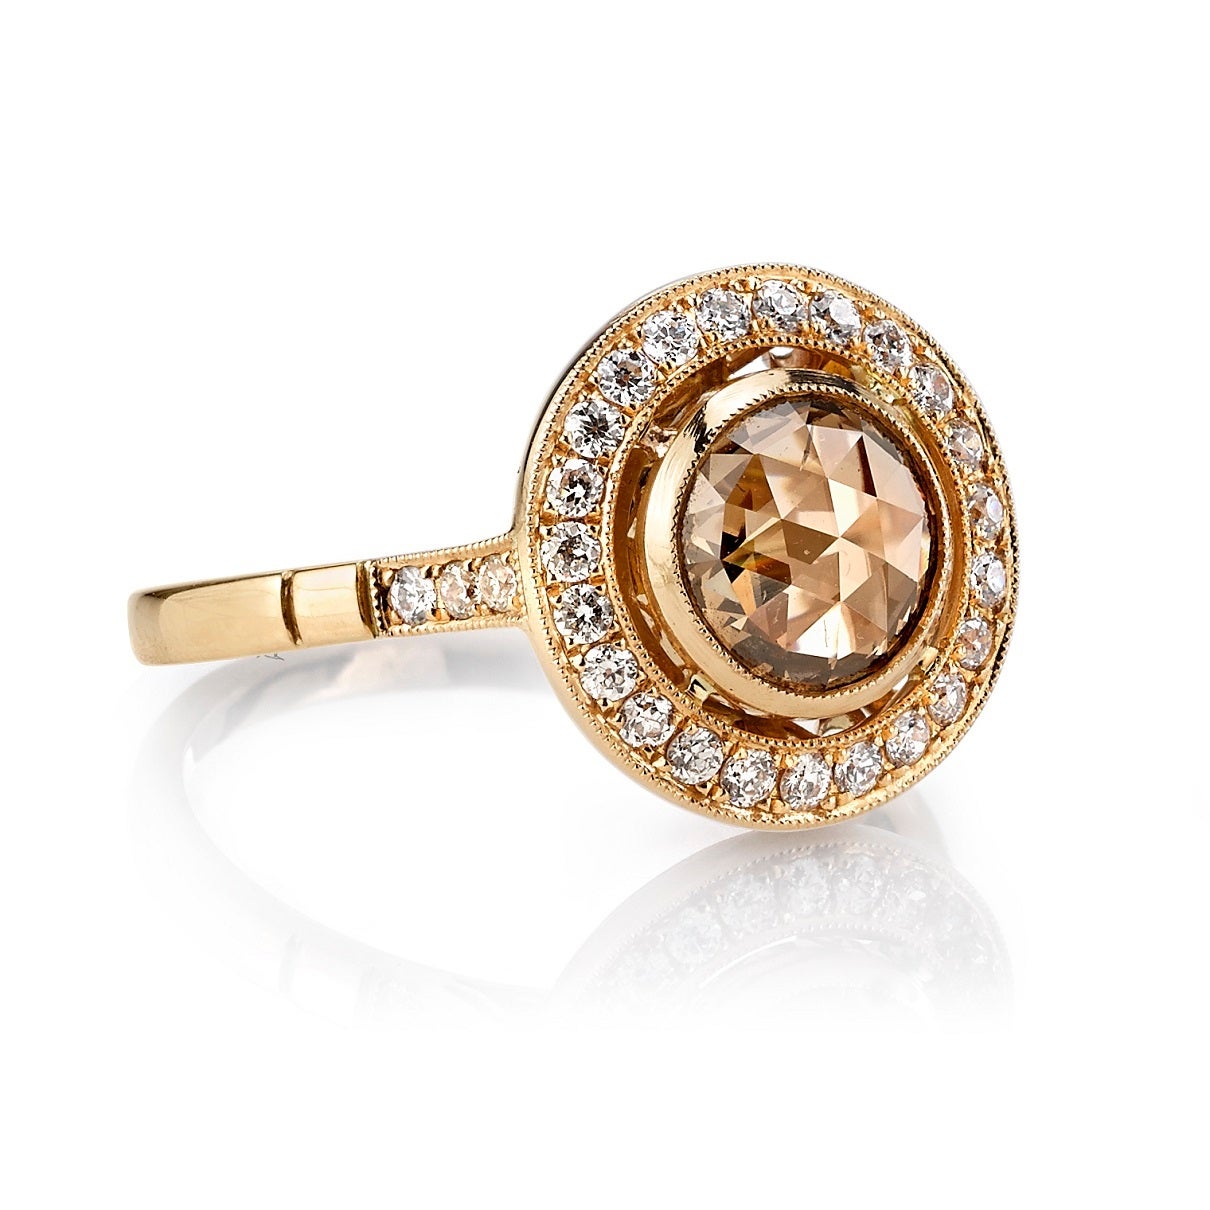 1.03ct Brown/SI Rose cut diamond set in an 18kt rose gold handcrafted 